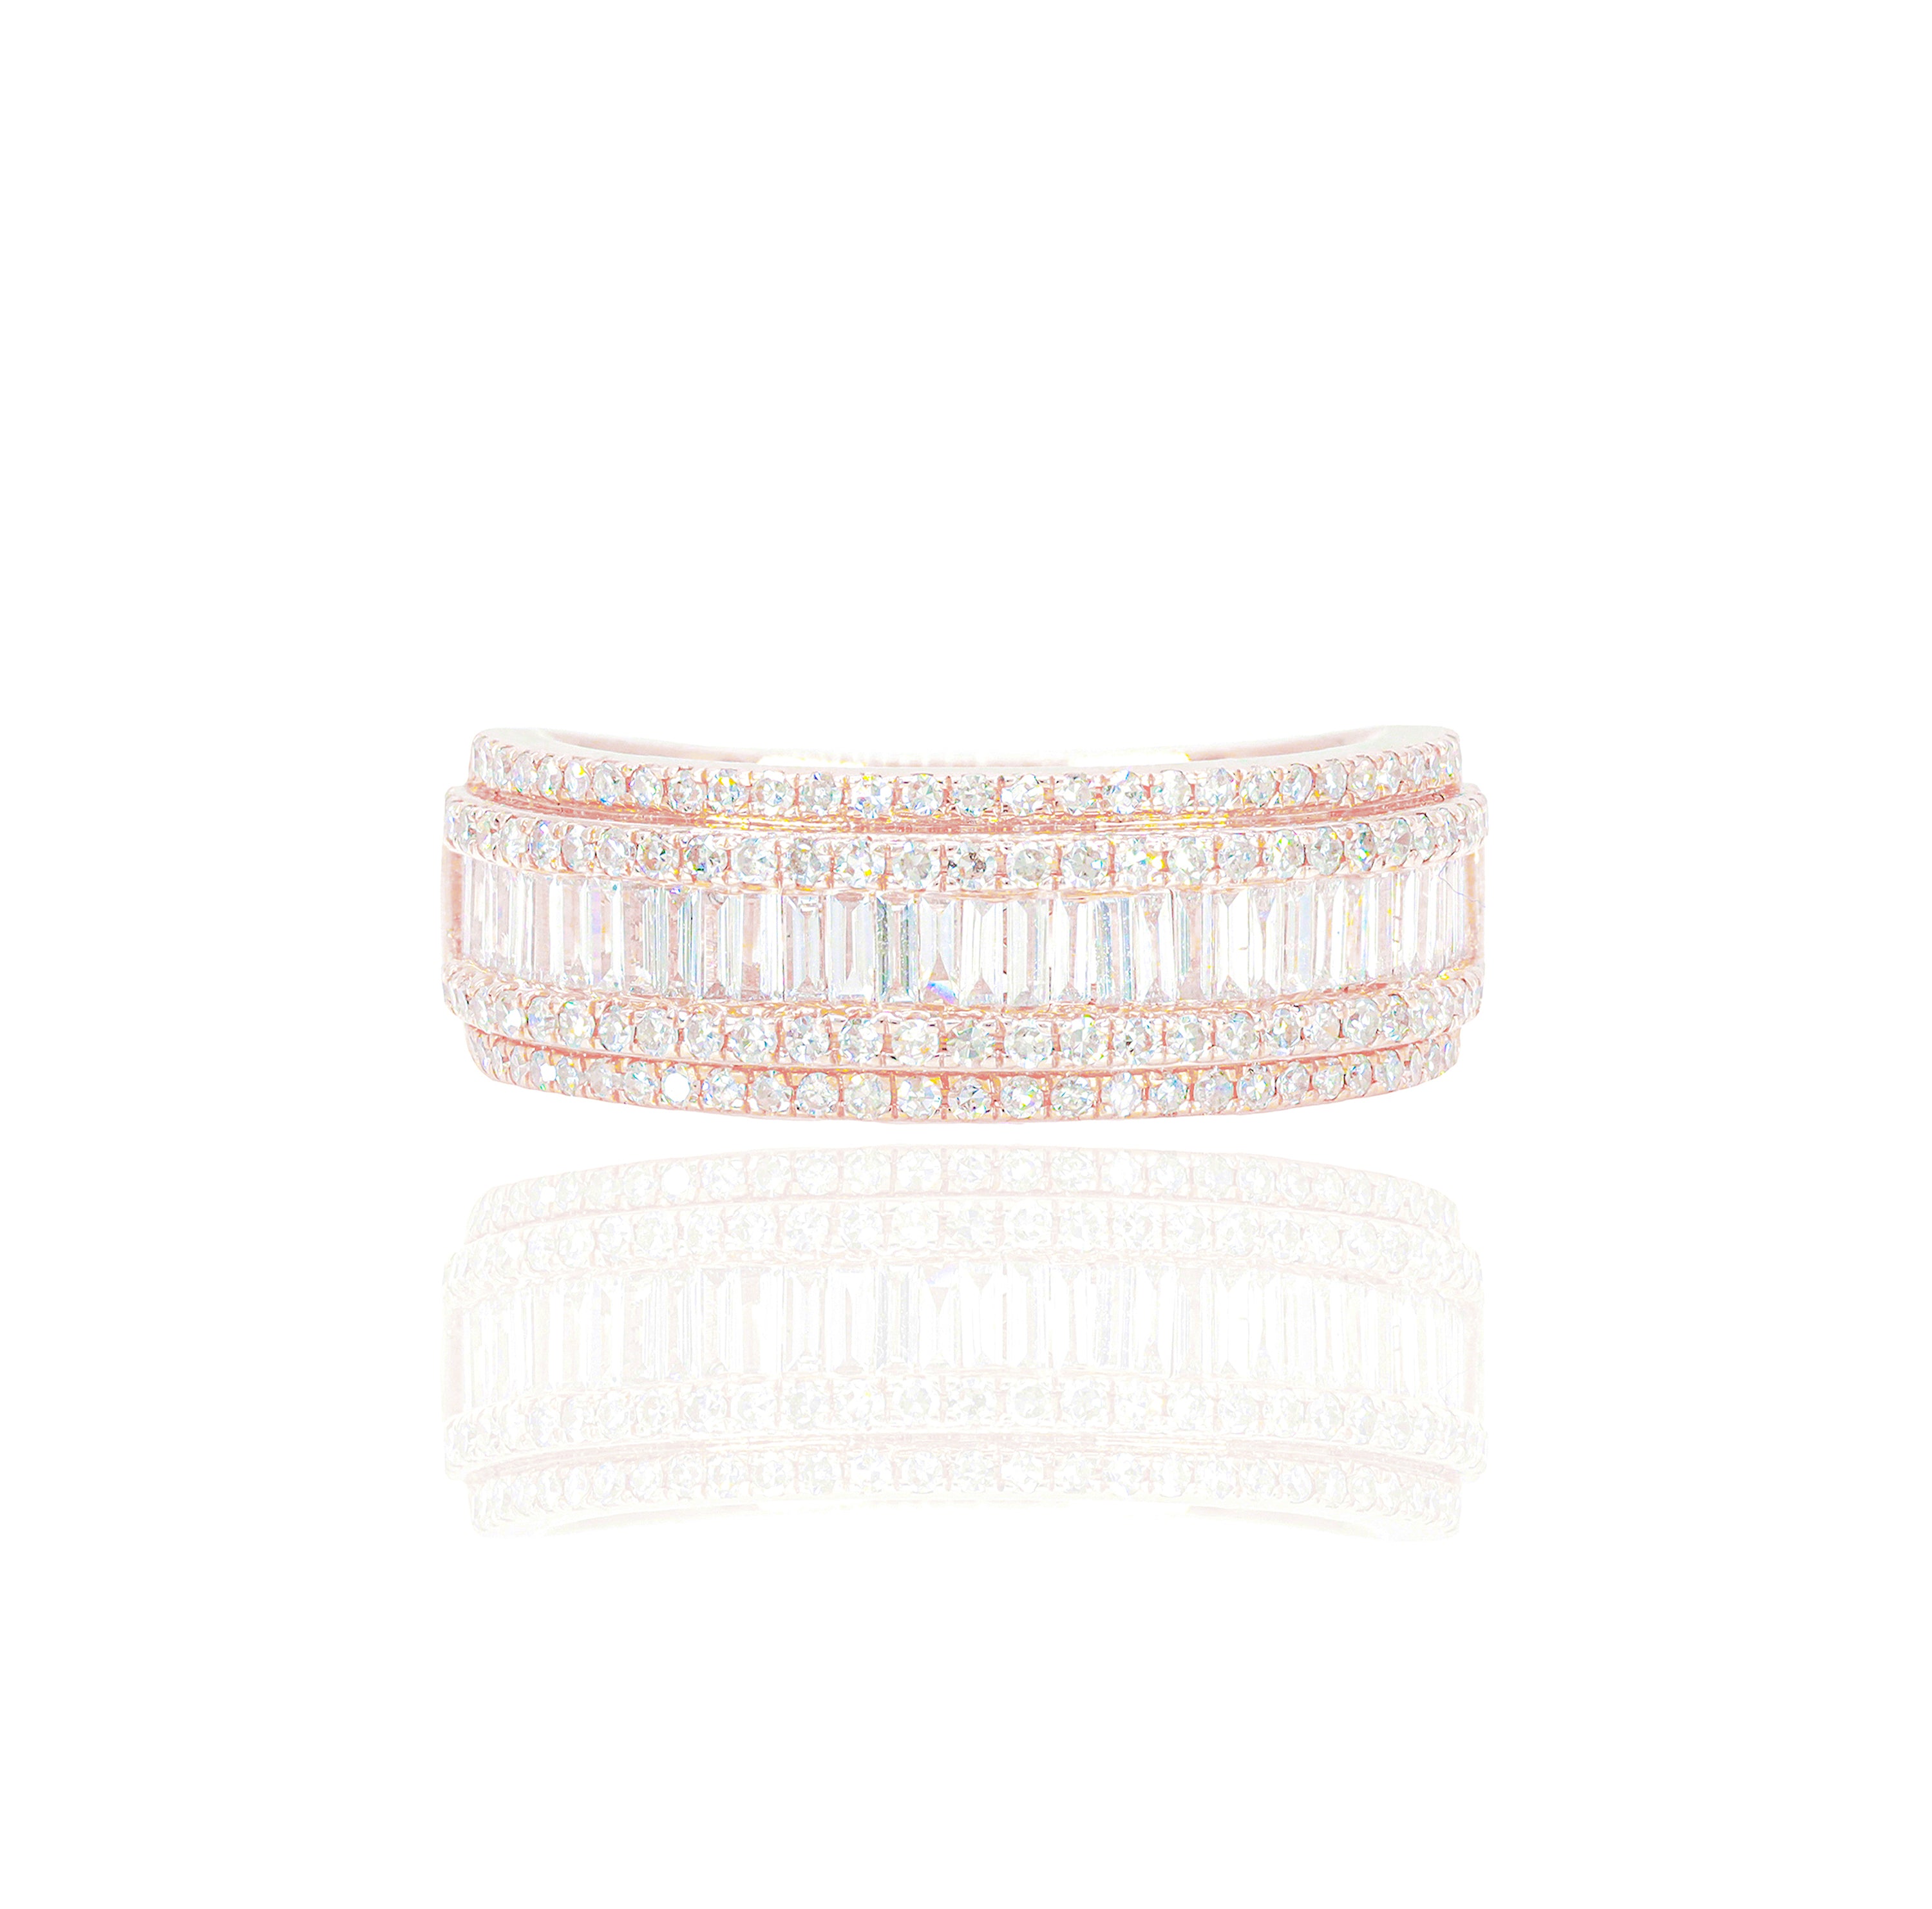 Straight Baguette with Round Border Diamond Ring